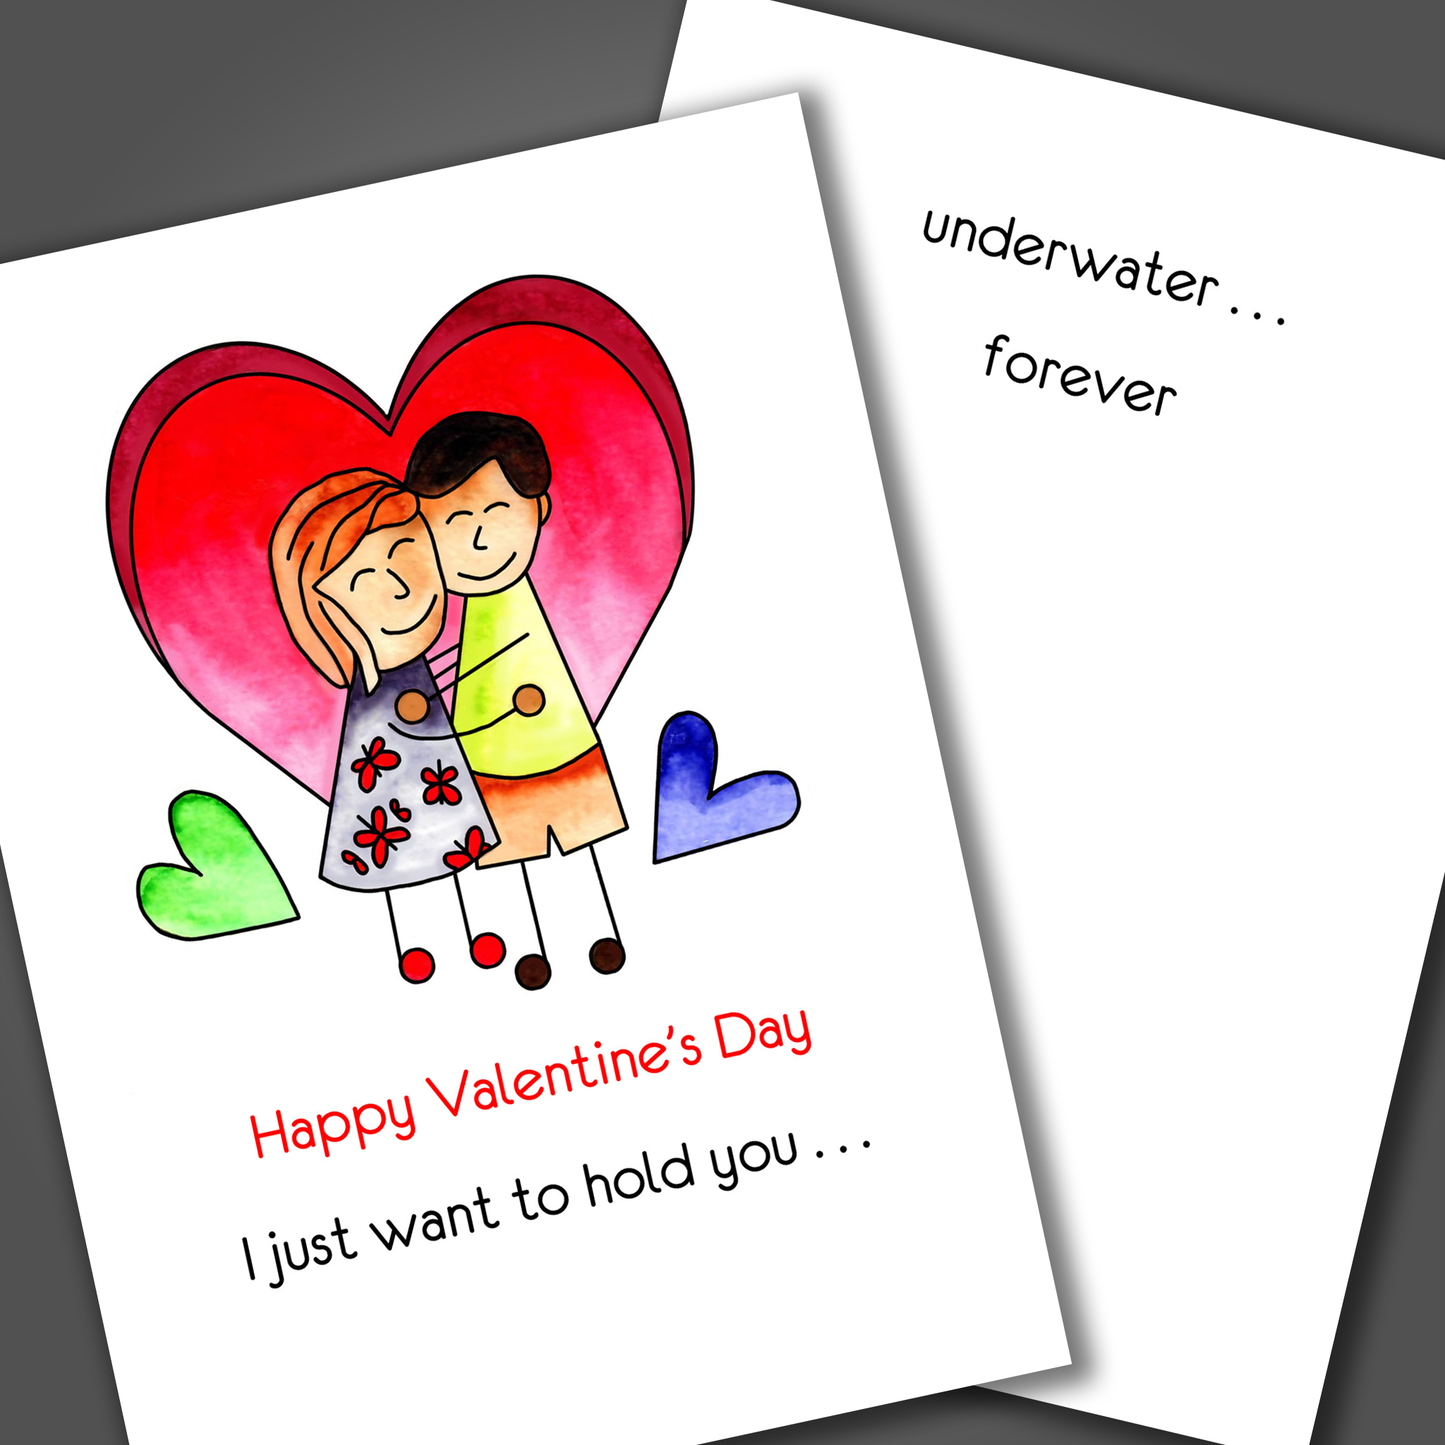 Funny Valentine's day card with man and woman hugging each other on front of card. Inside the card is a funny joke that says I want to you underwater forever.